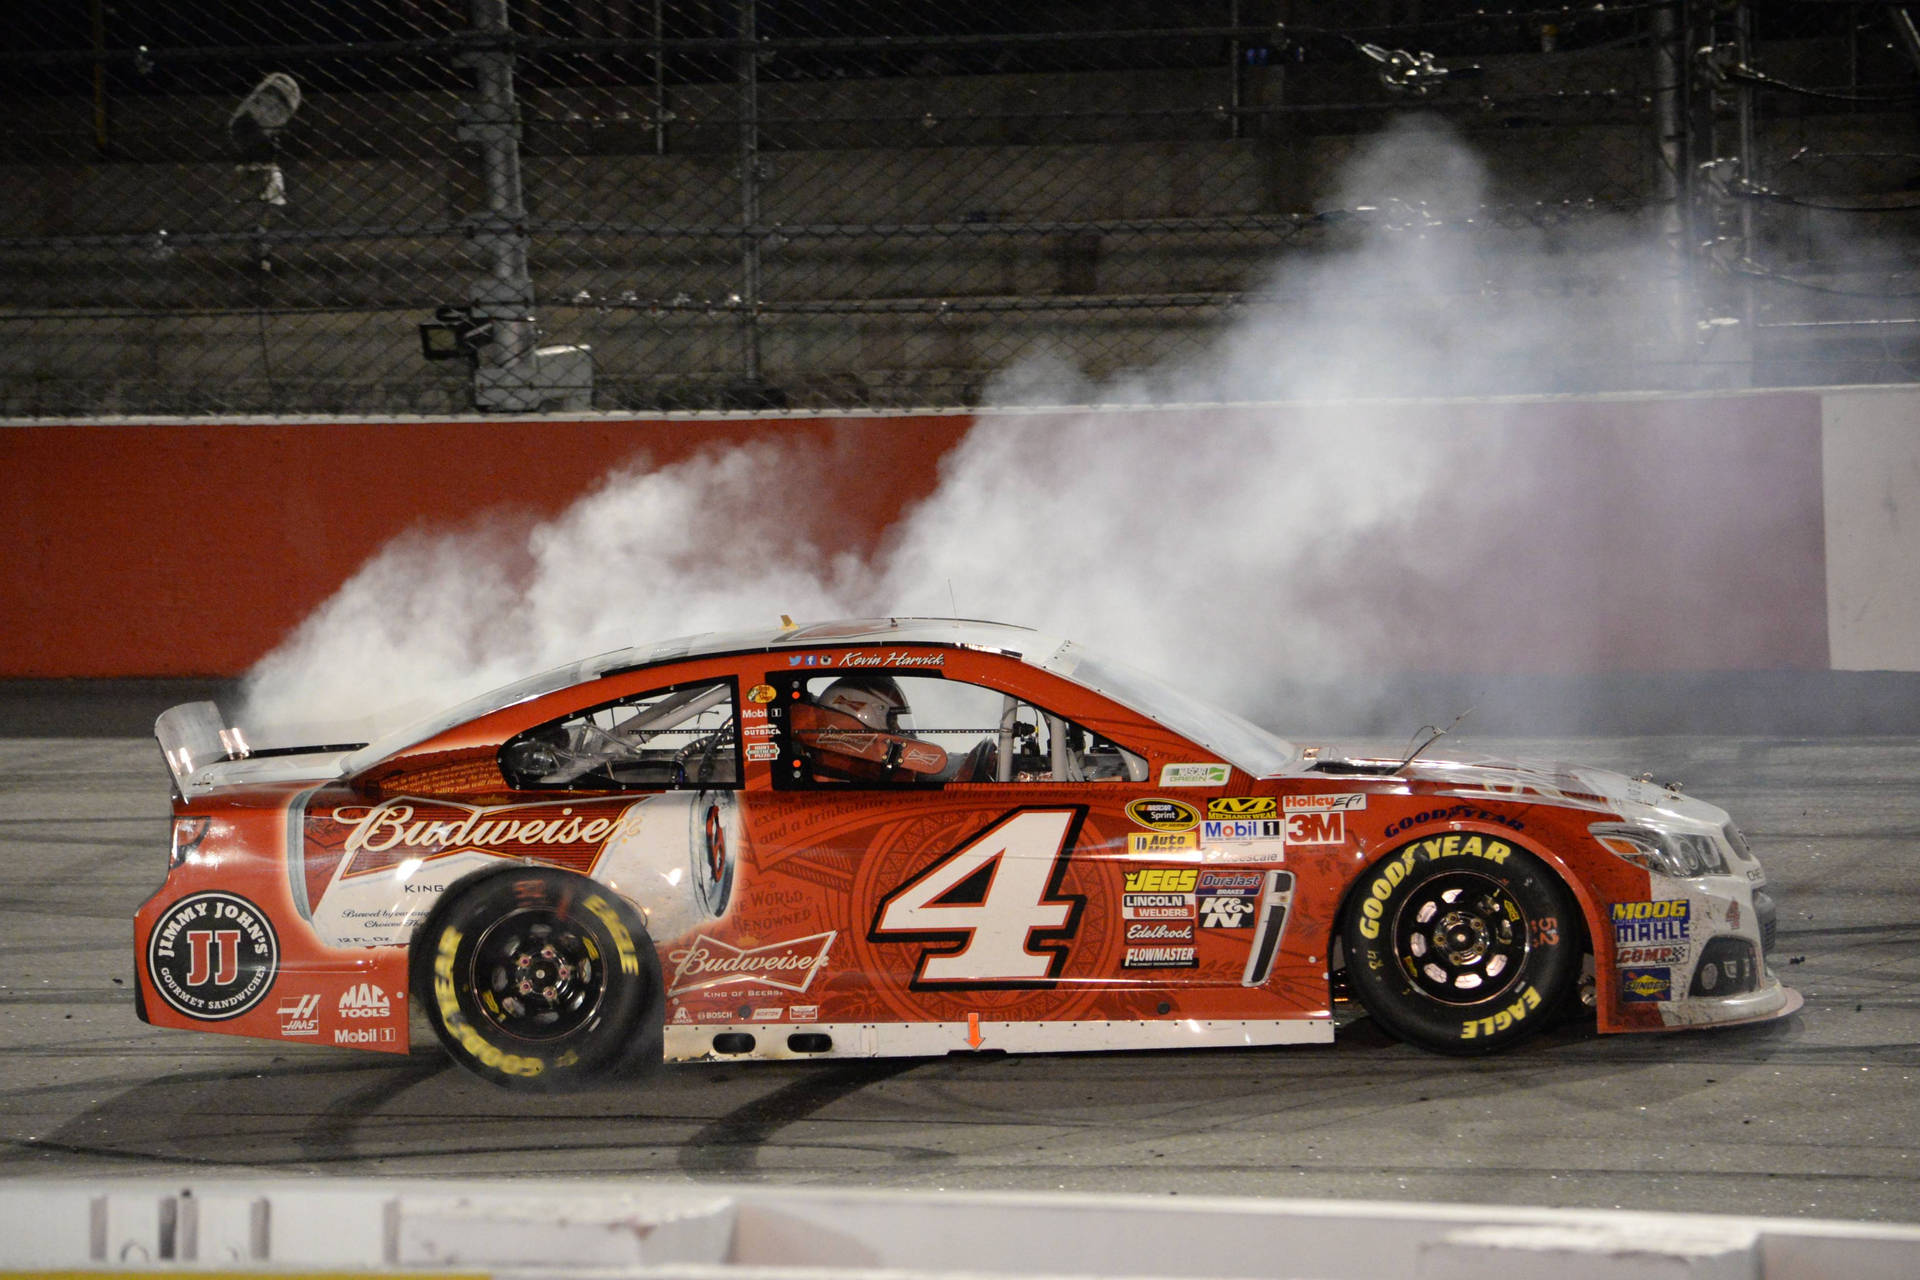 Kevin Harvick’s Race Car in Action Wallpaper